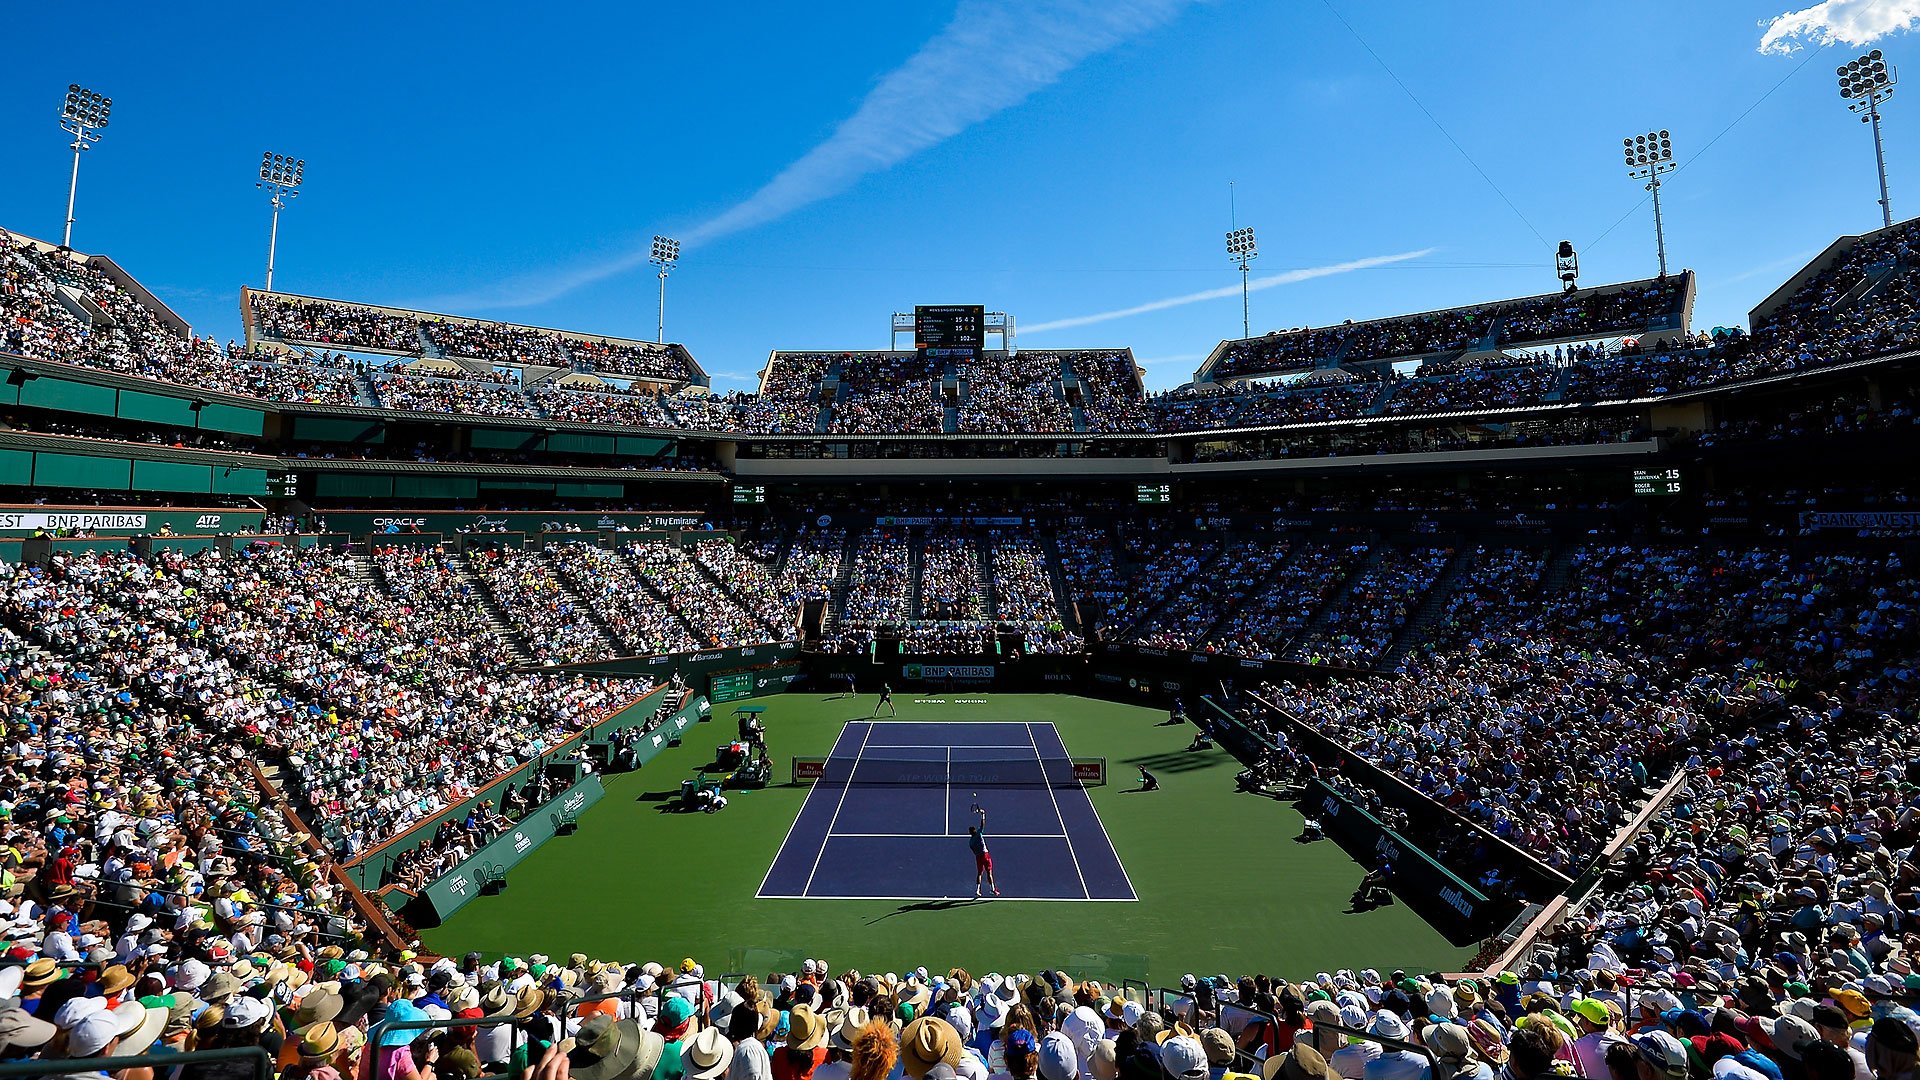 Indian Wells is a major tennis tournament which is played out in March